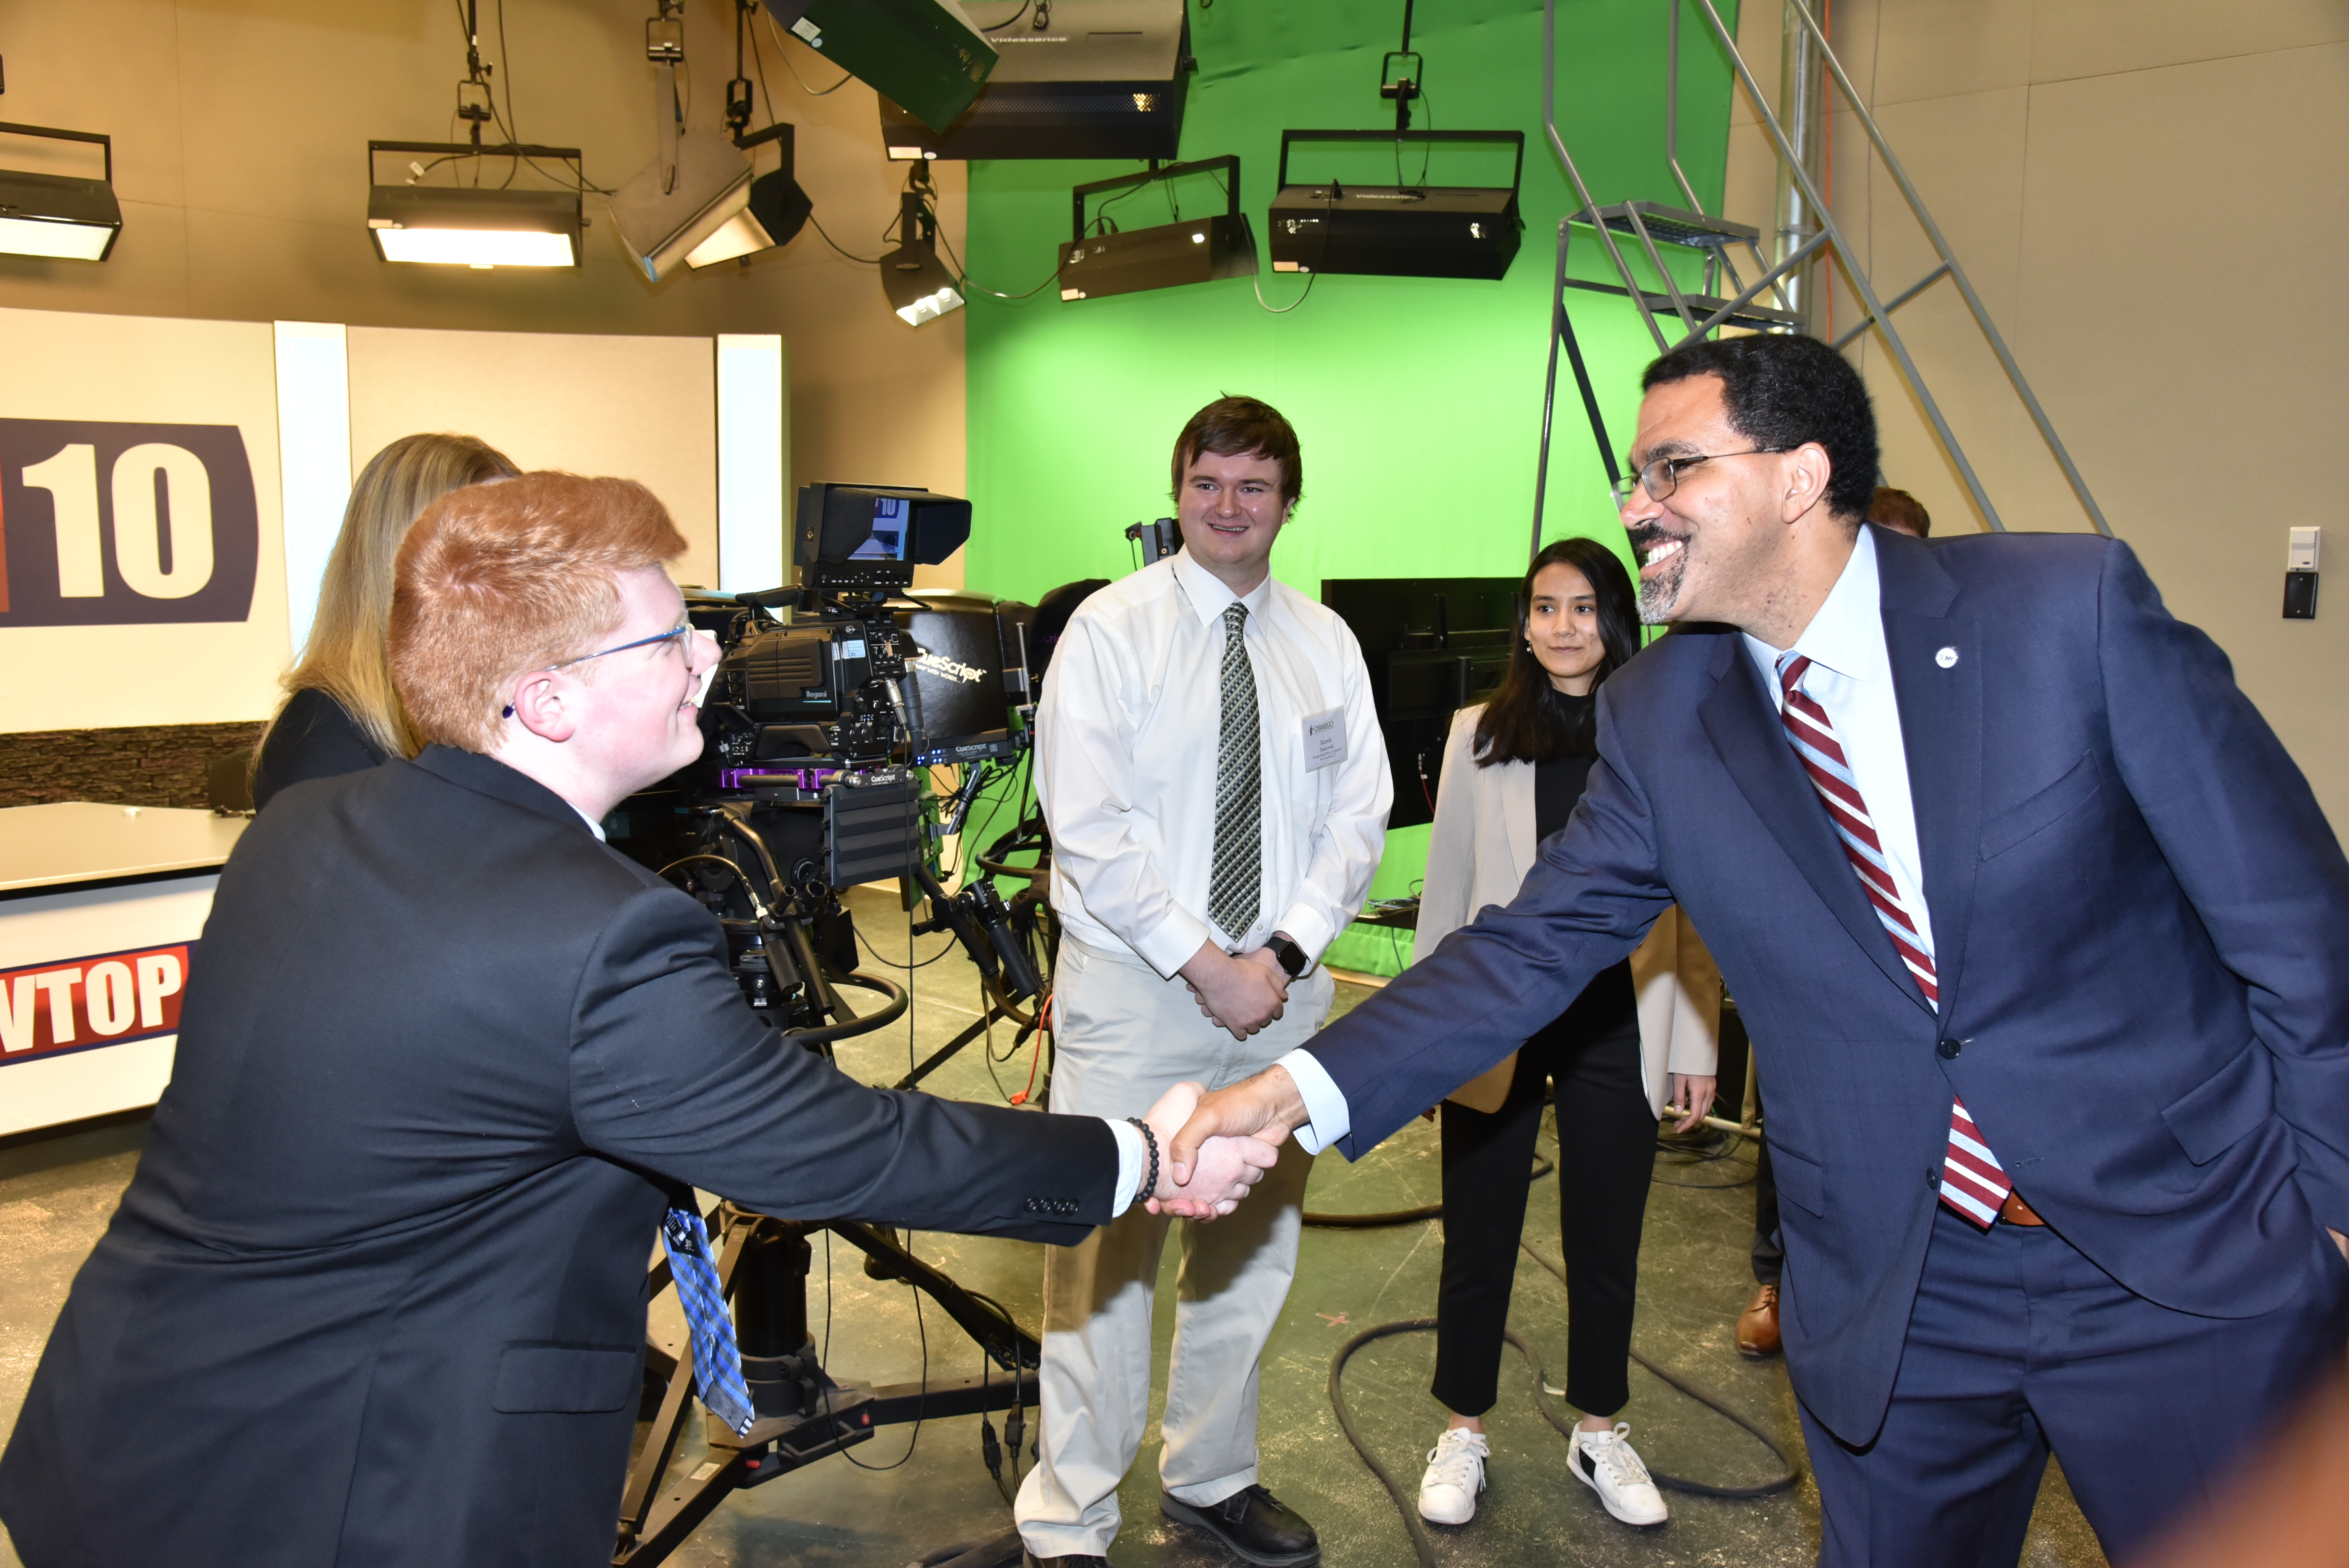 Chancellor John B. King Jr. greets Scott Brubaker and the team with student TV station WTOP